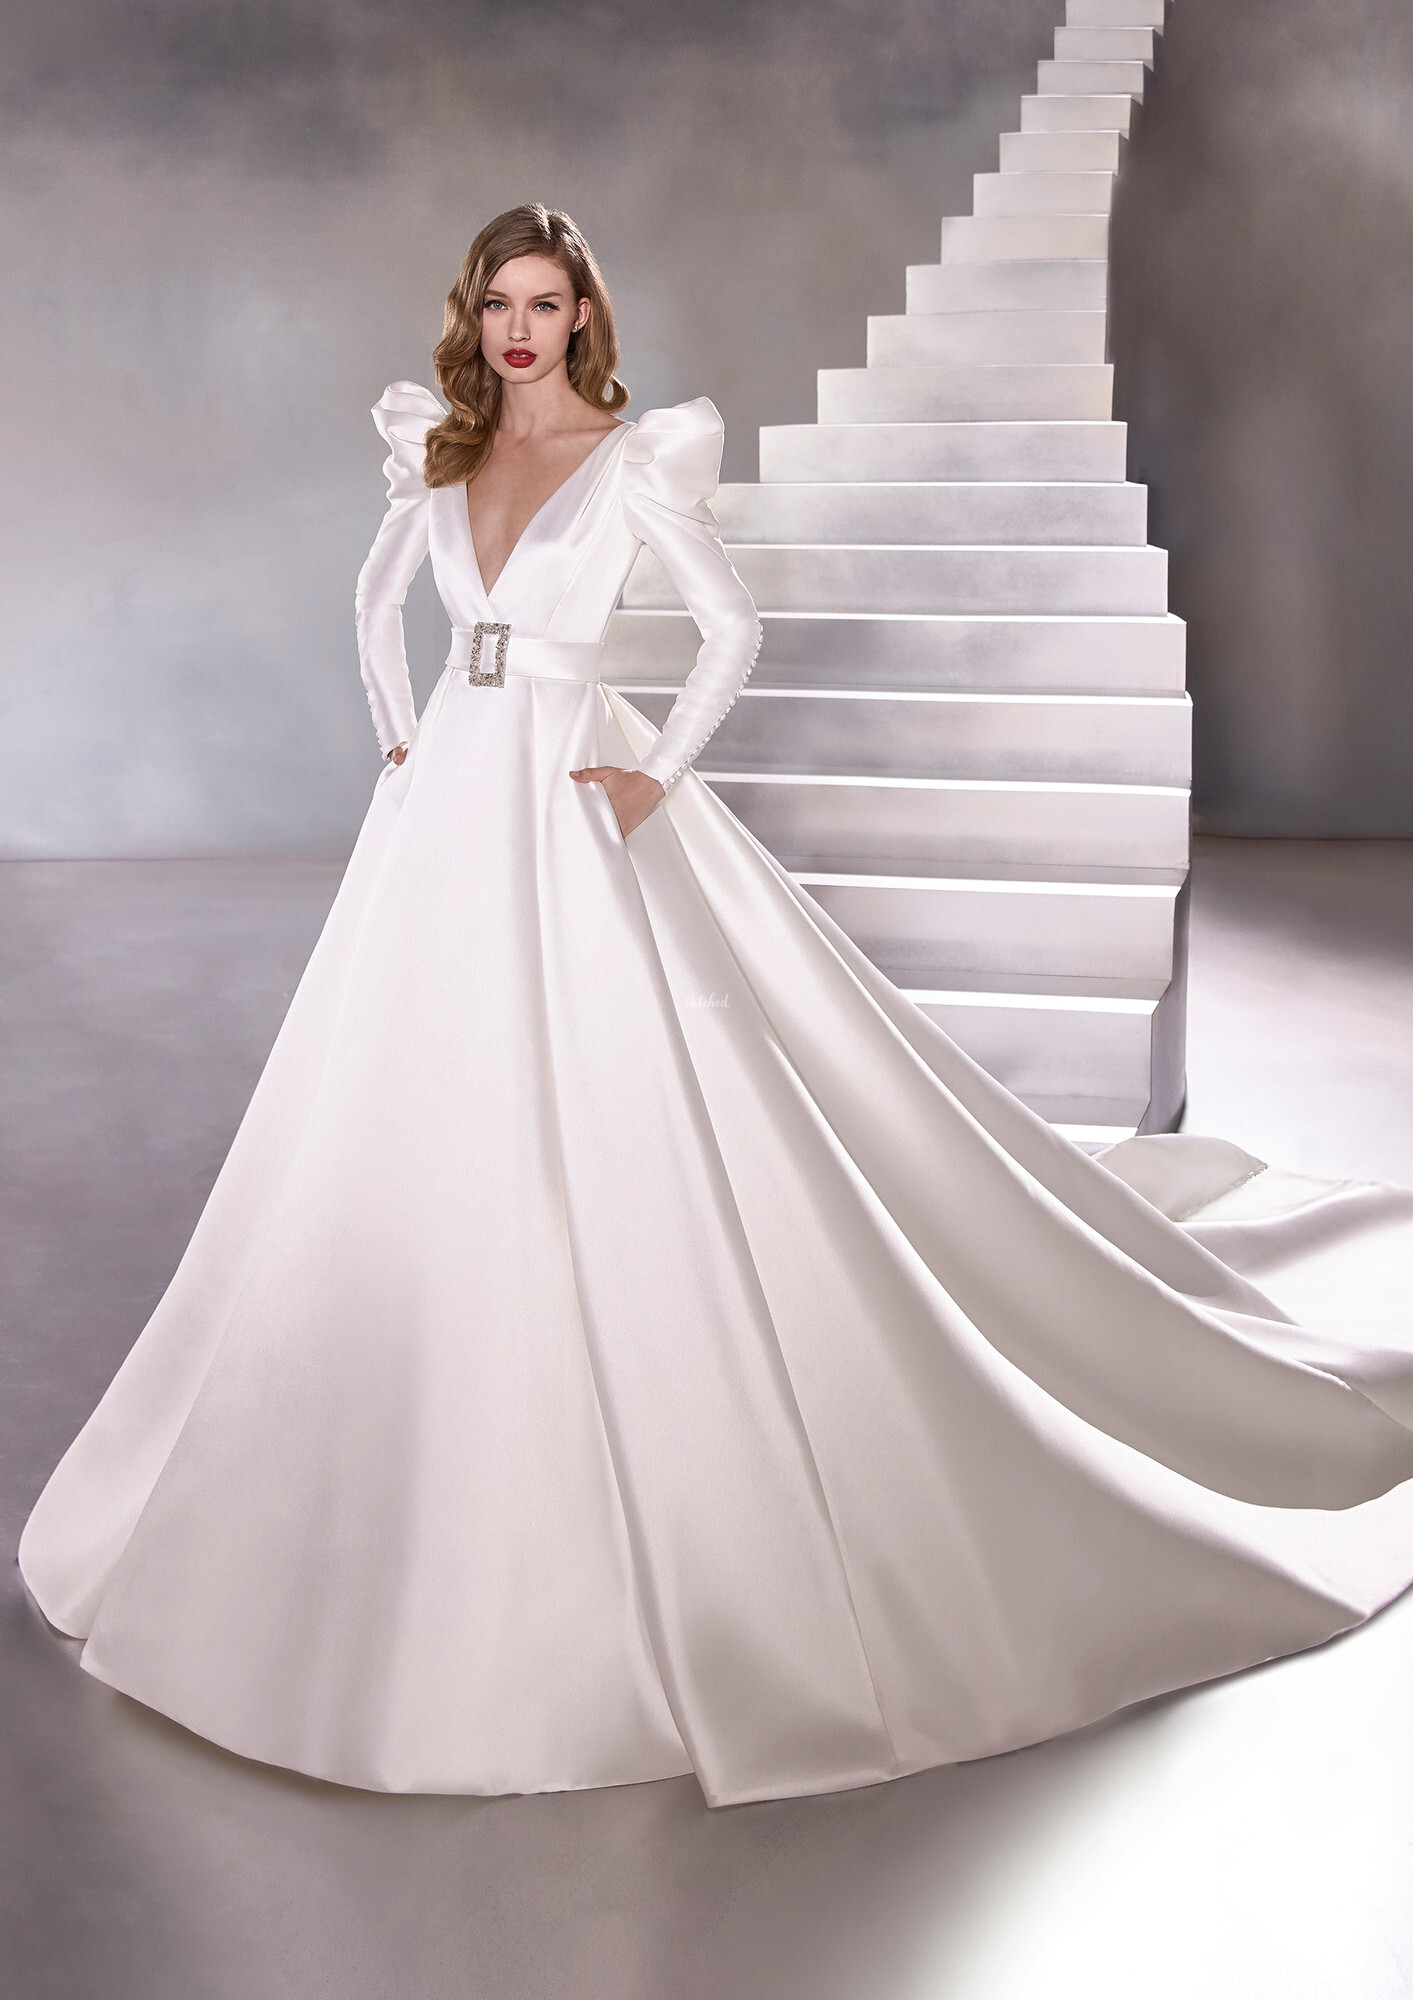 SPACE Wedding Dress from Atelier Pronovias hitched.co.uk